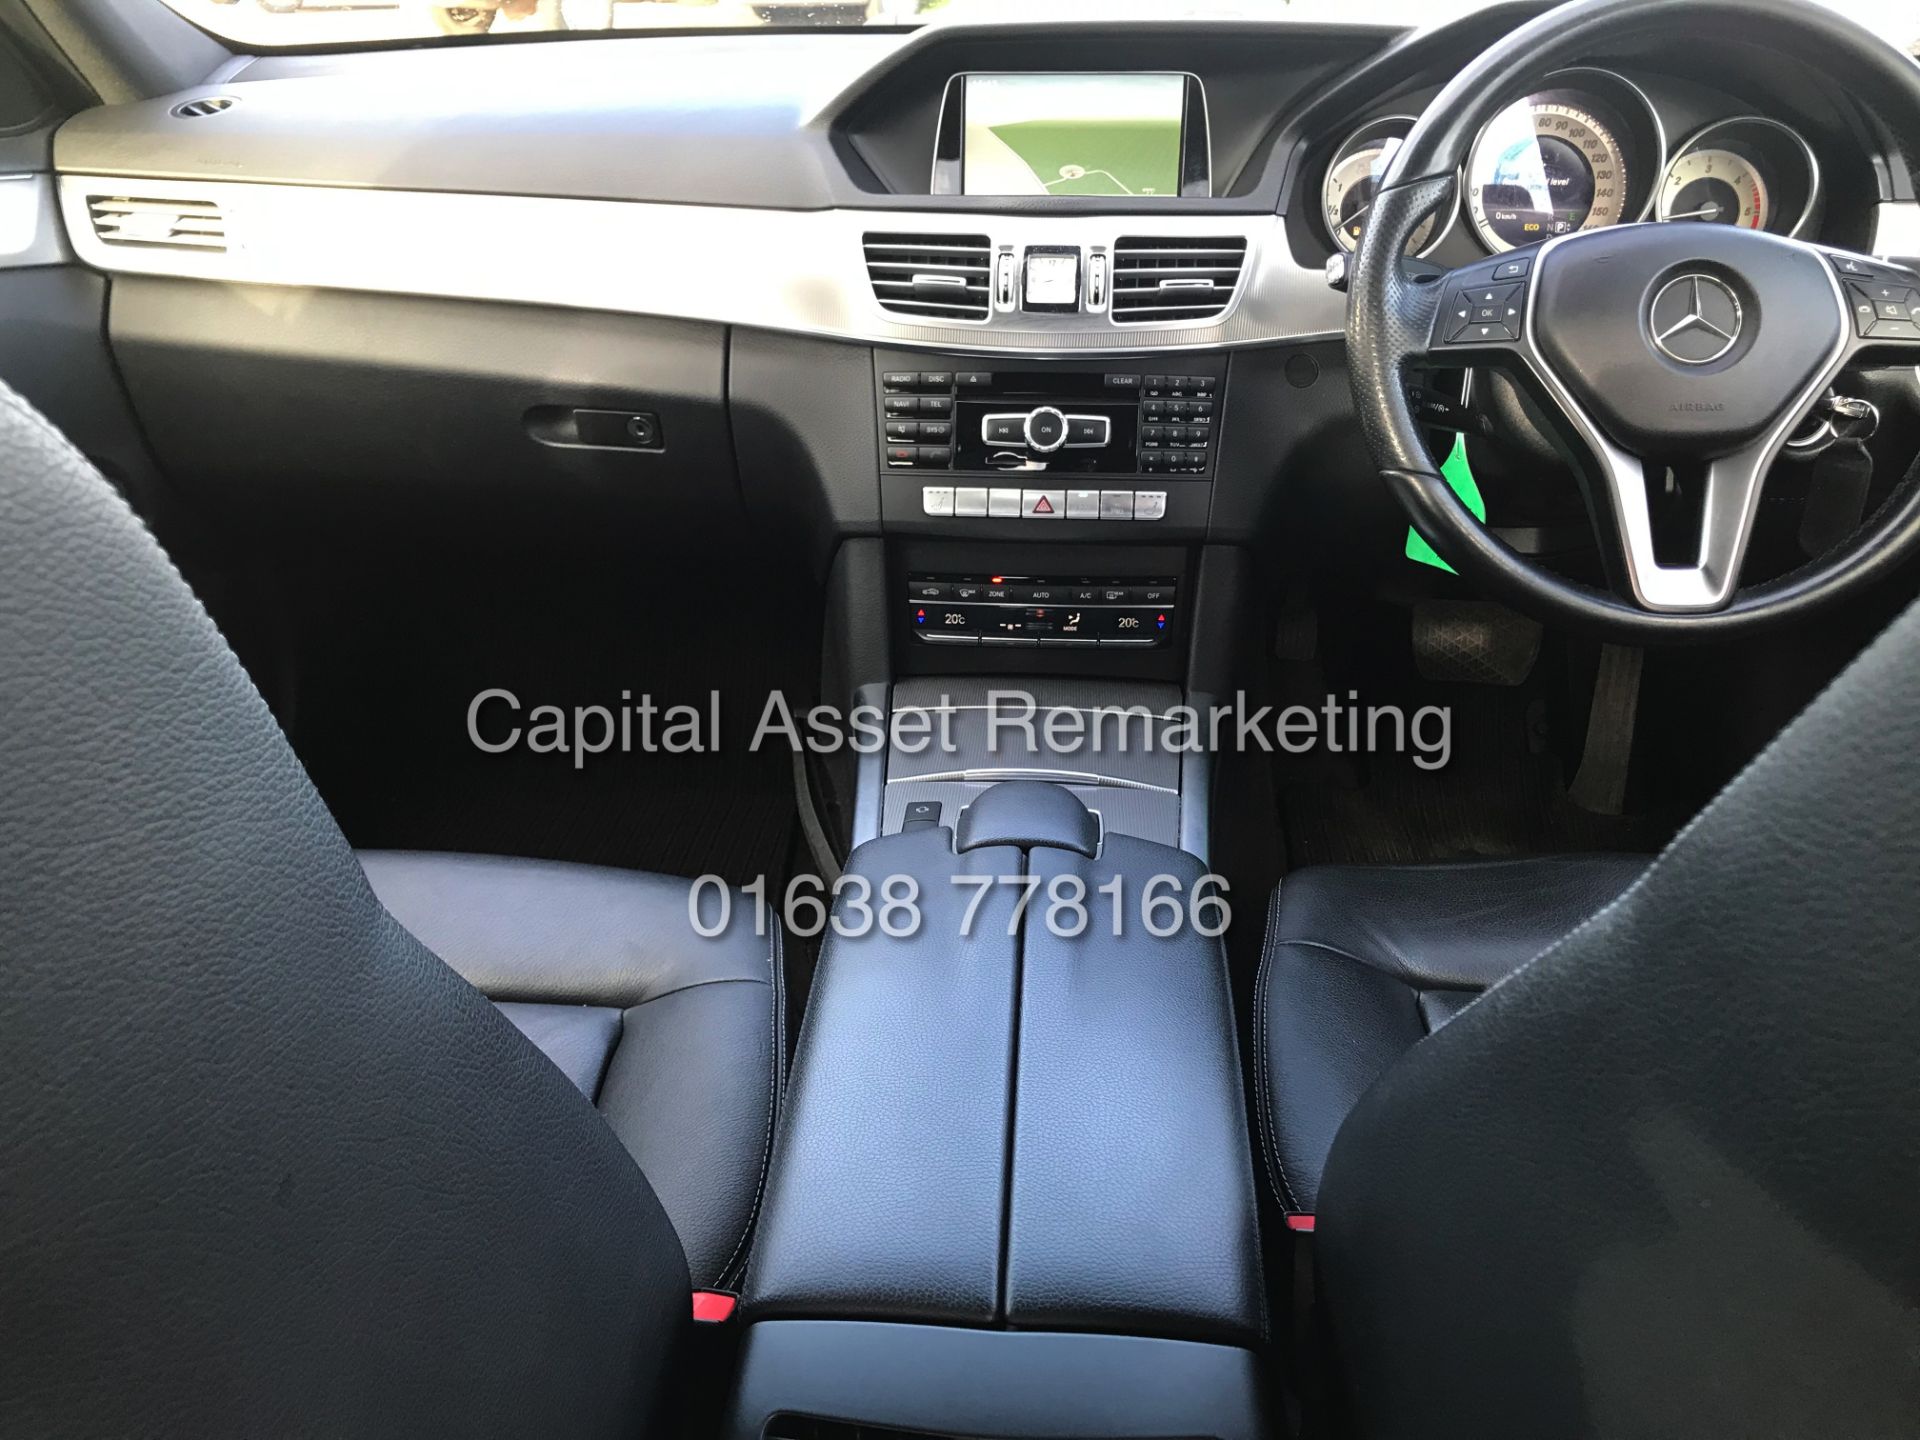 MERCEDES E220d "SPECIAL EQUIPMENT" 7G TRONIC AUTO (2015 MODEL) 1 OWNER - SAT NAV - LEATHER - Image 13 of 26